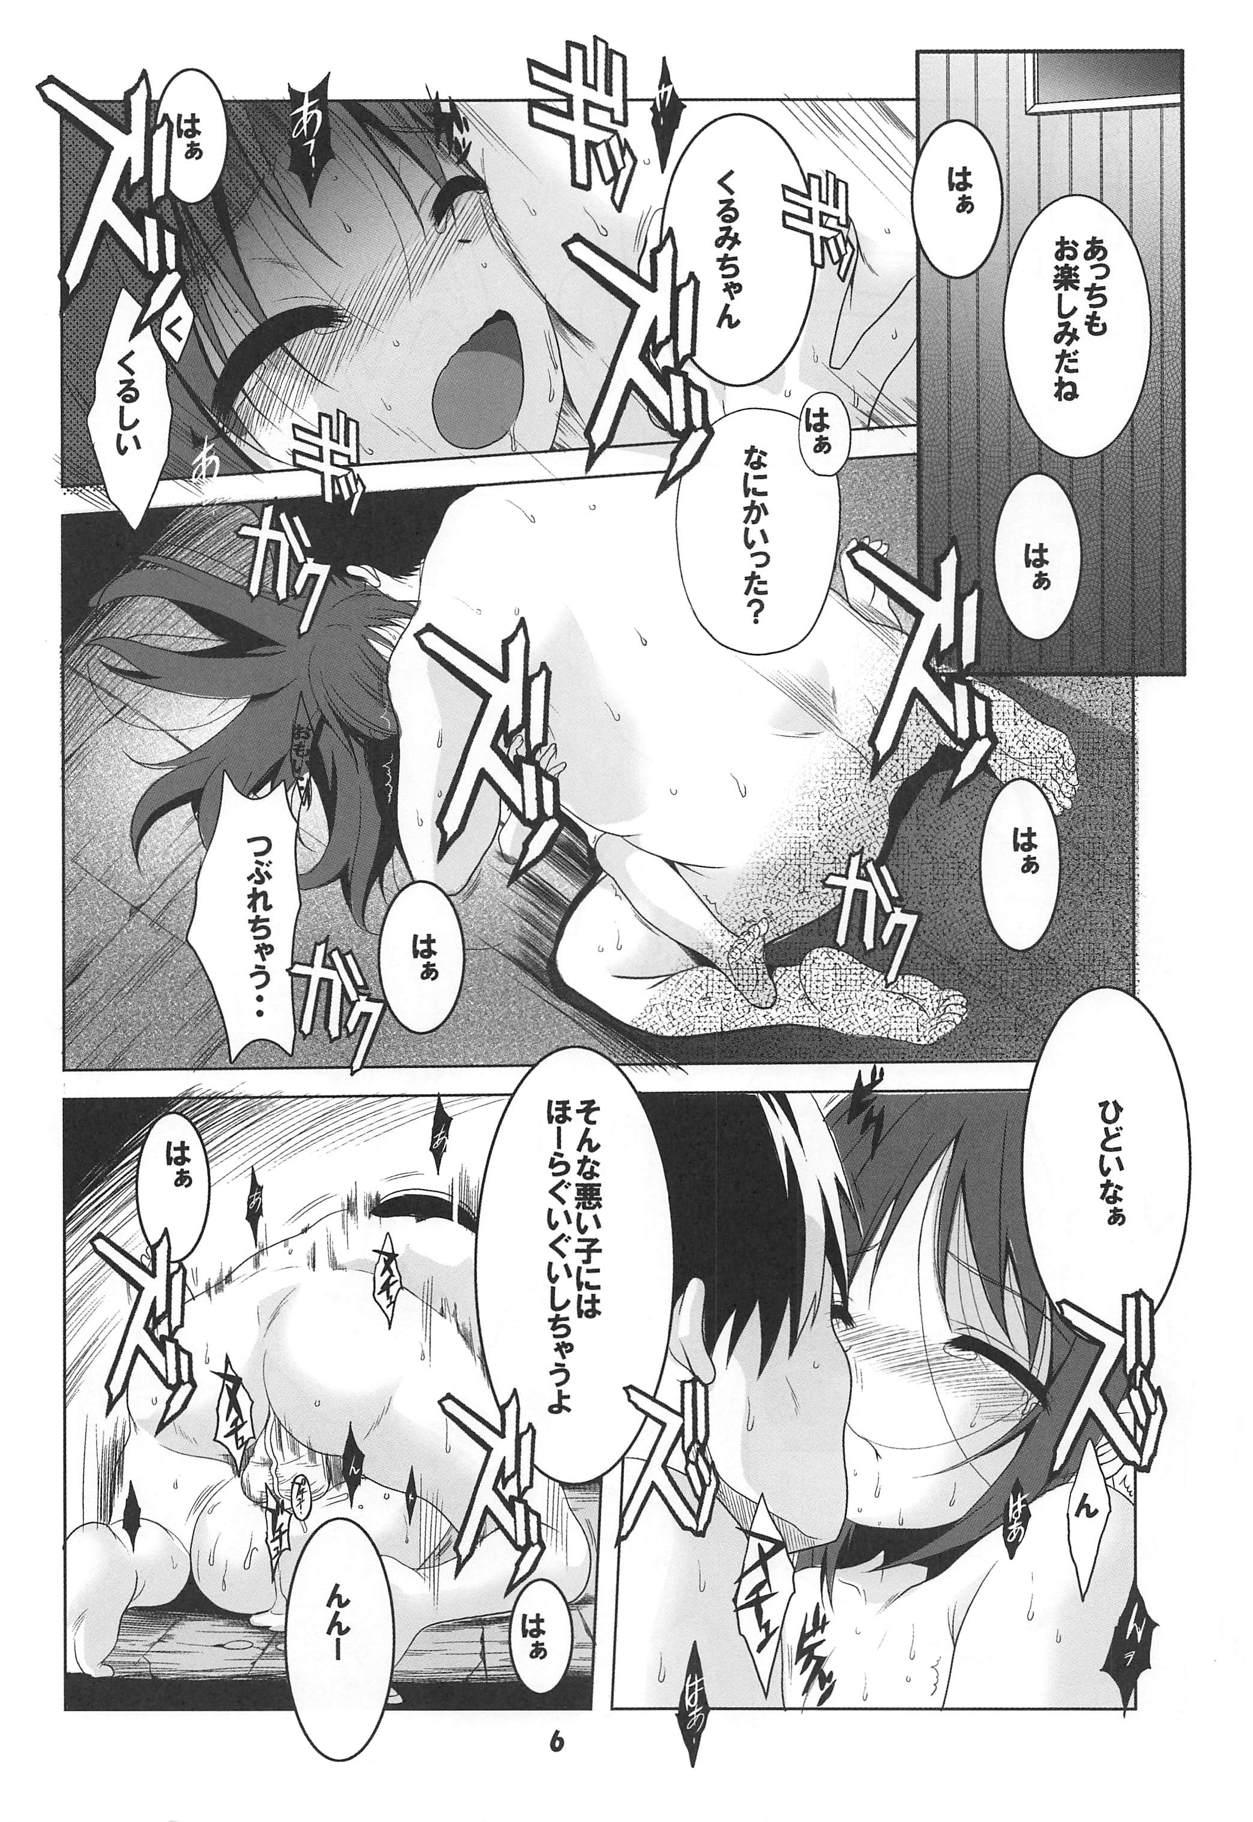 Prostitute Tenshi to 3P! ADVANCE - Tenshi no 3p Africa - Page 5